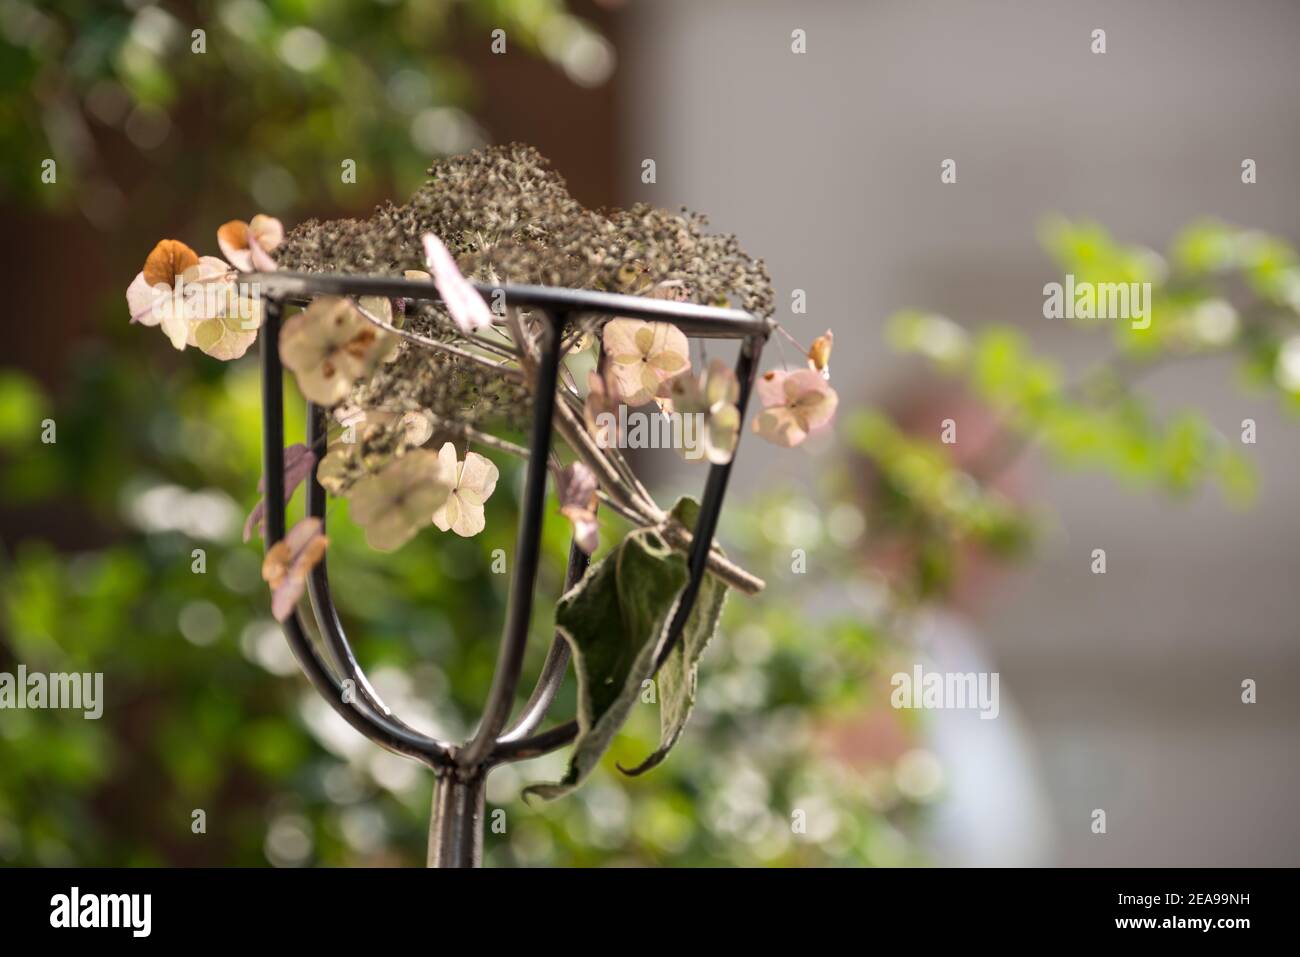 Flowers, blurring, blossoms, faded Stock Photo